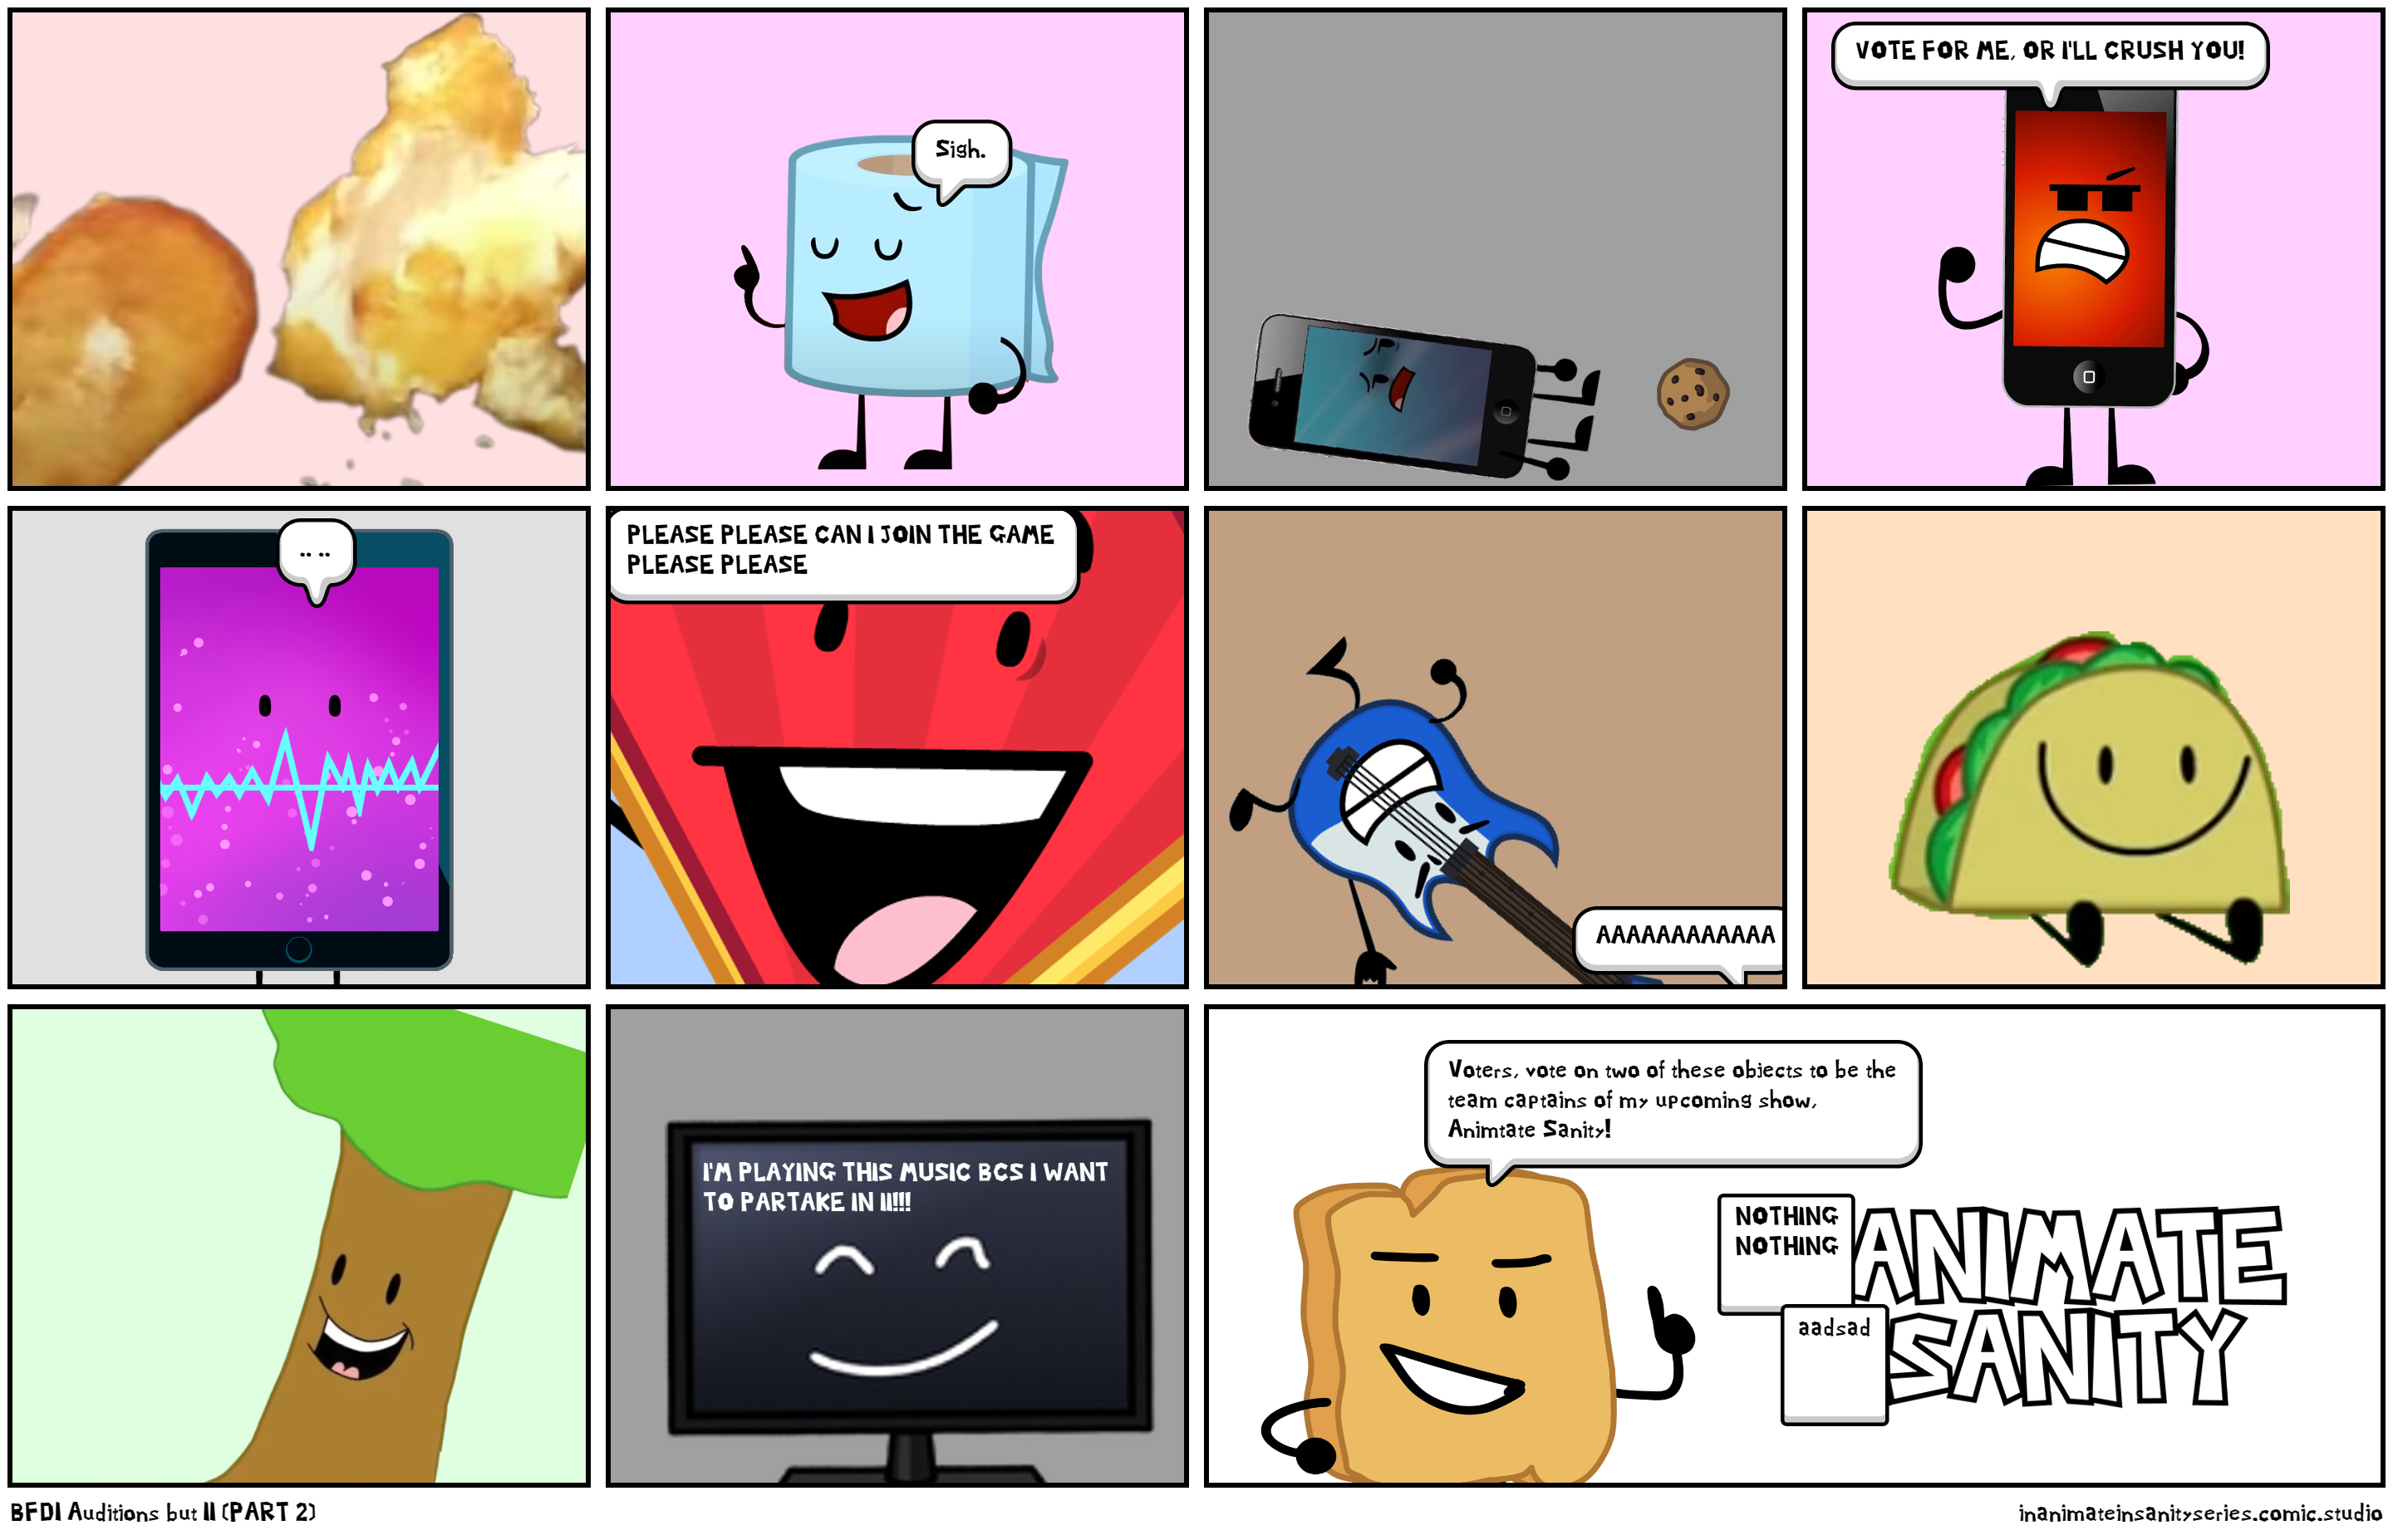 BFDI Auditions but II (PART 2)